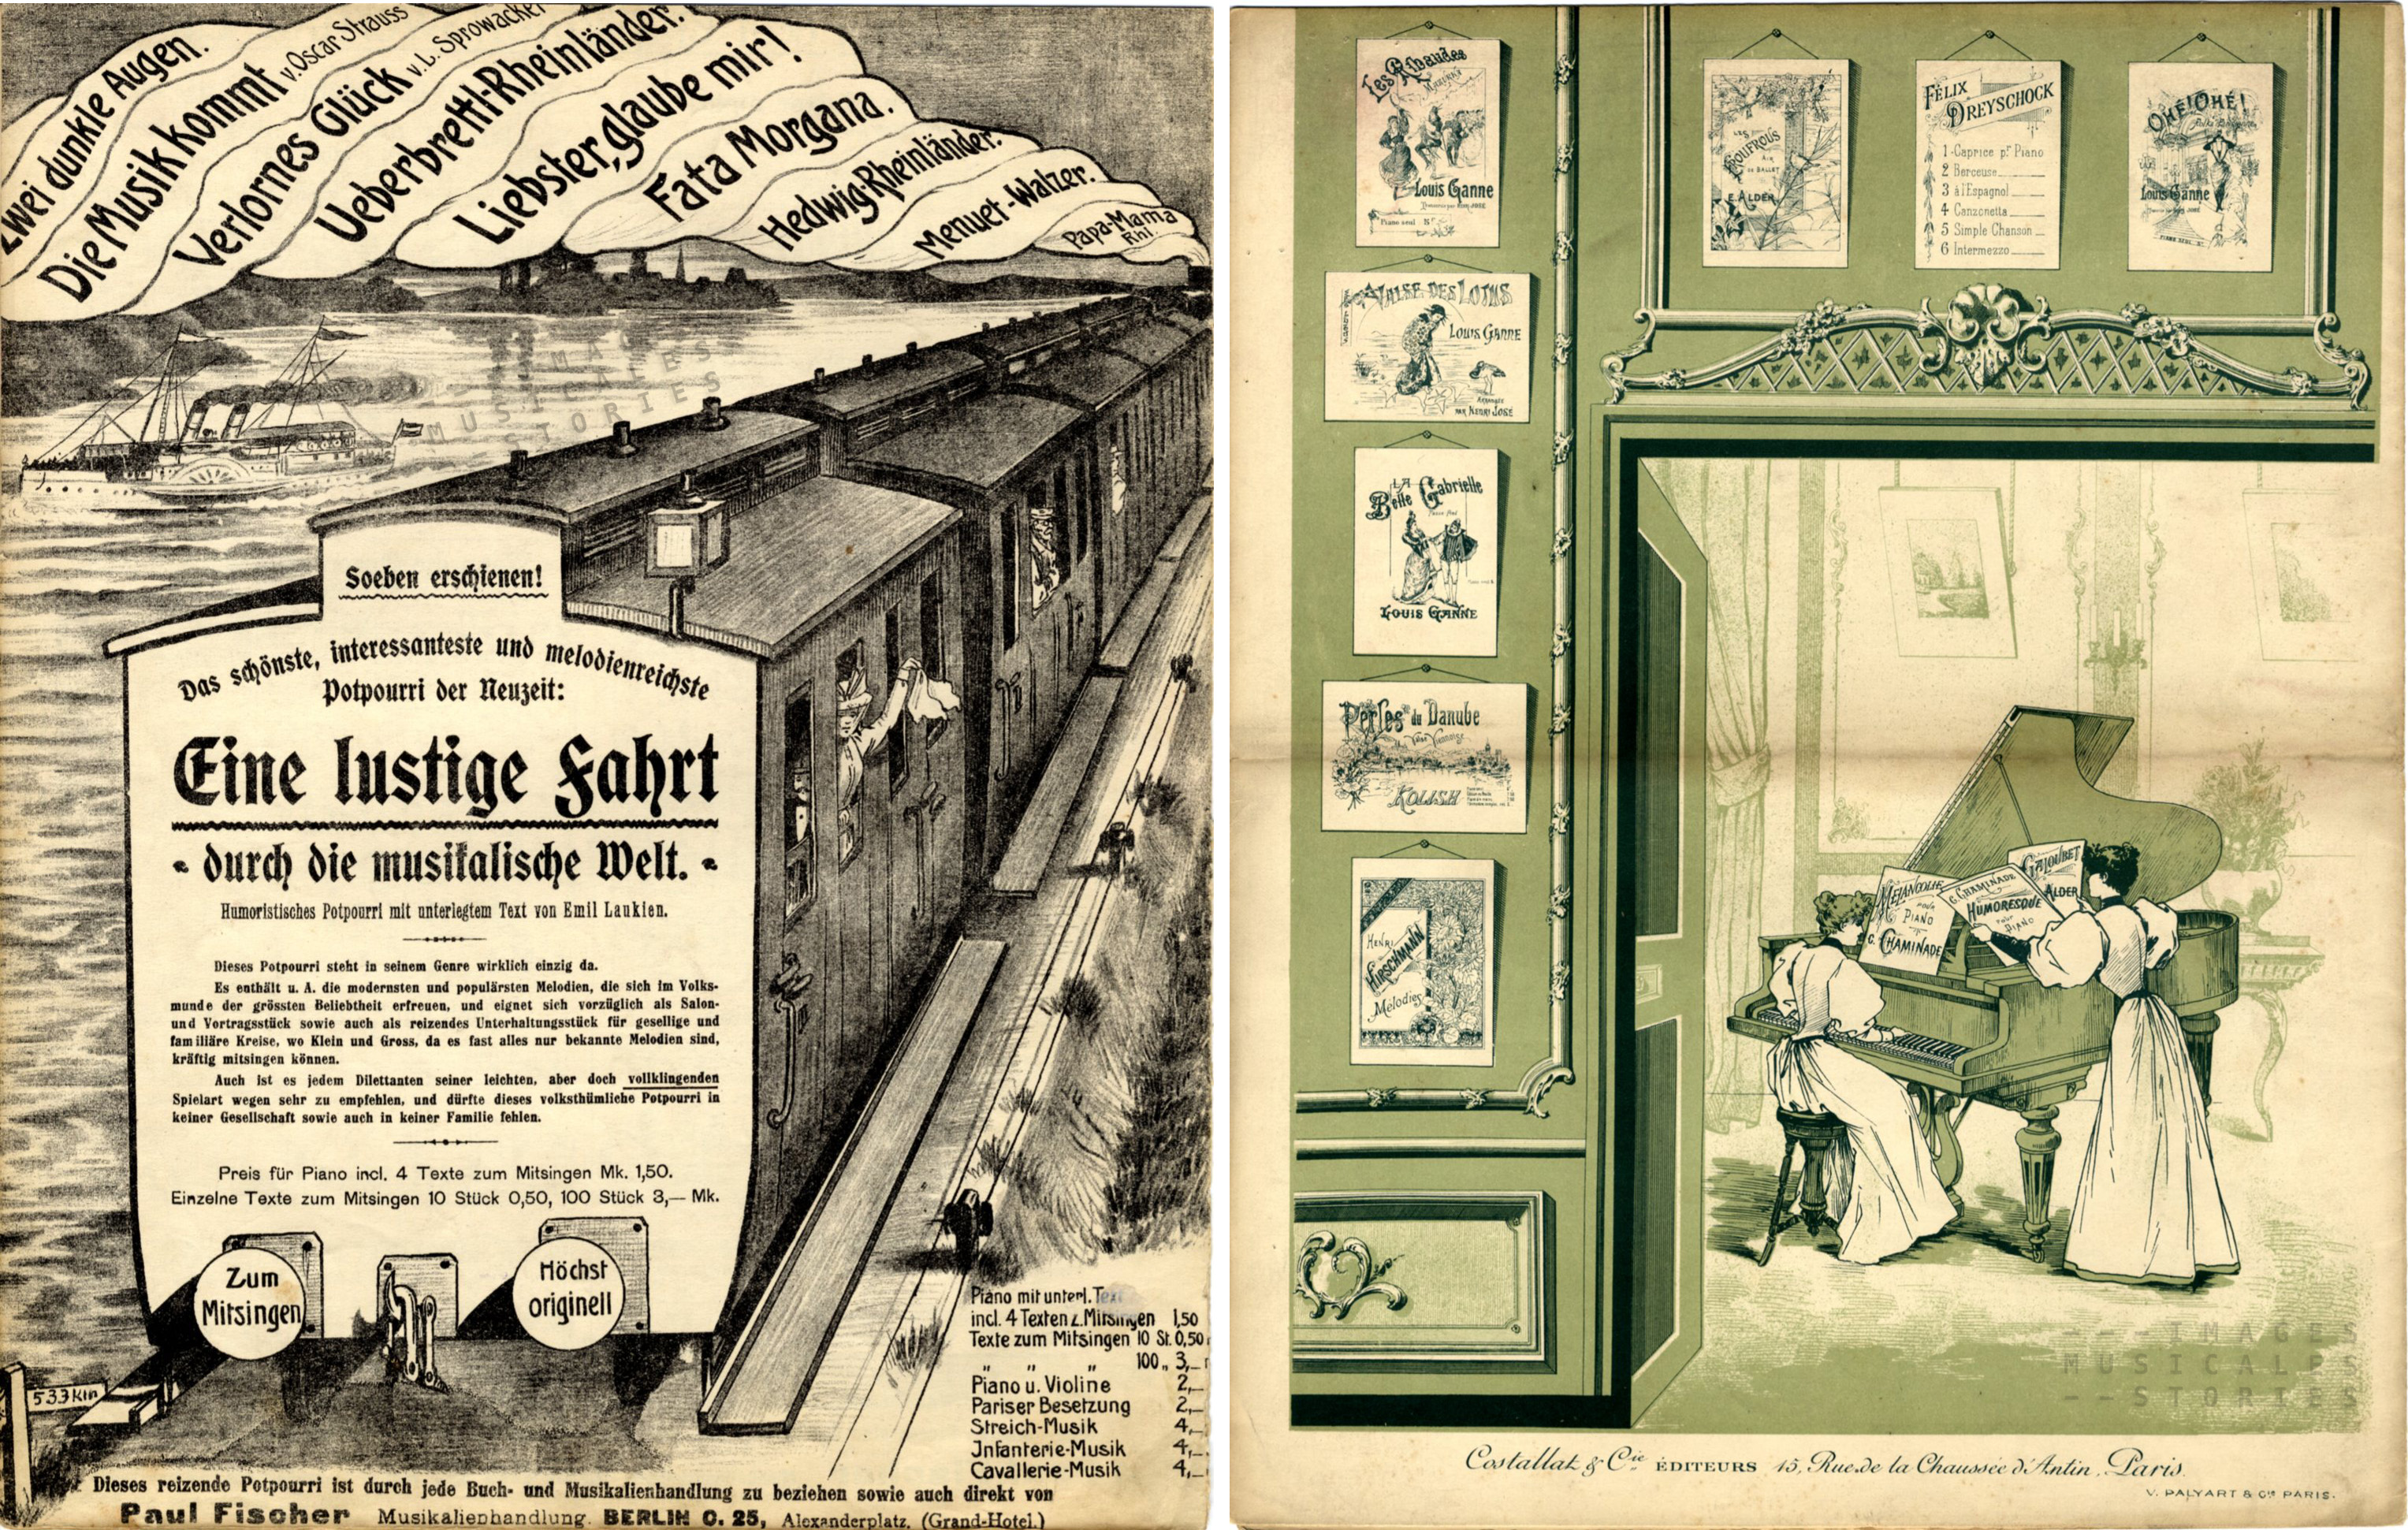 Left: the German illustrator worked out a very narrative view of the catalog.